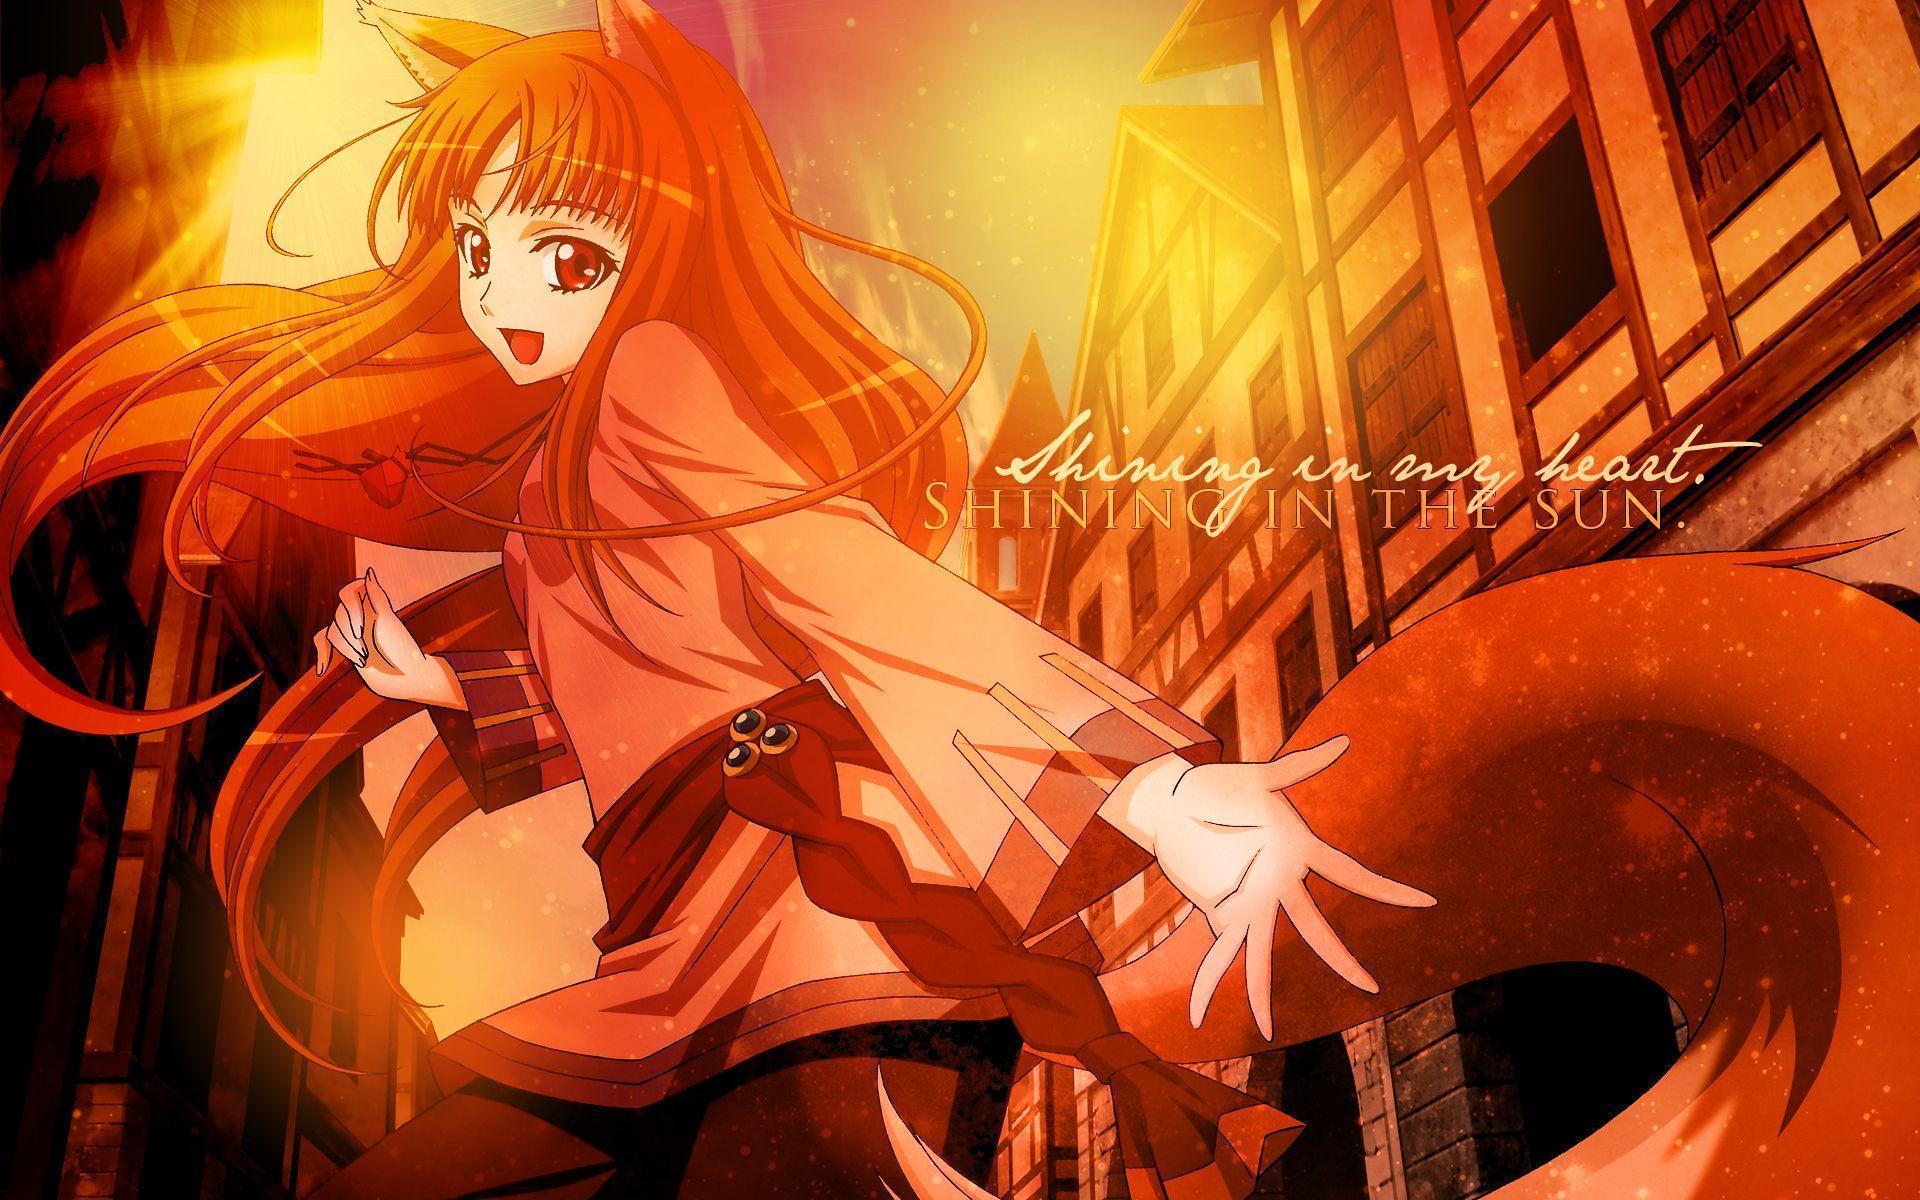 spice. Download Spice and Wolf 1920x1200 Wallpaper. azumi